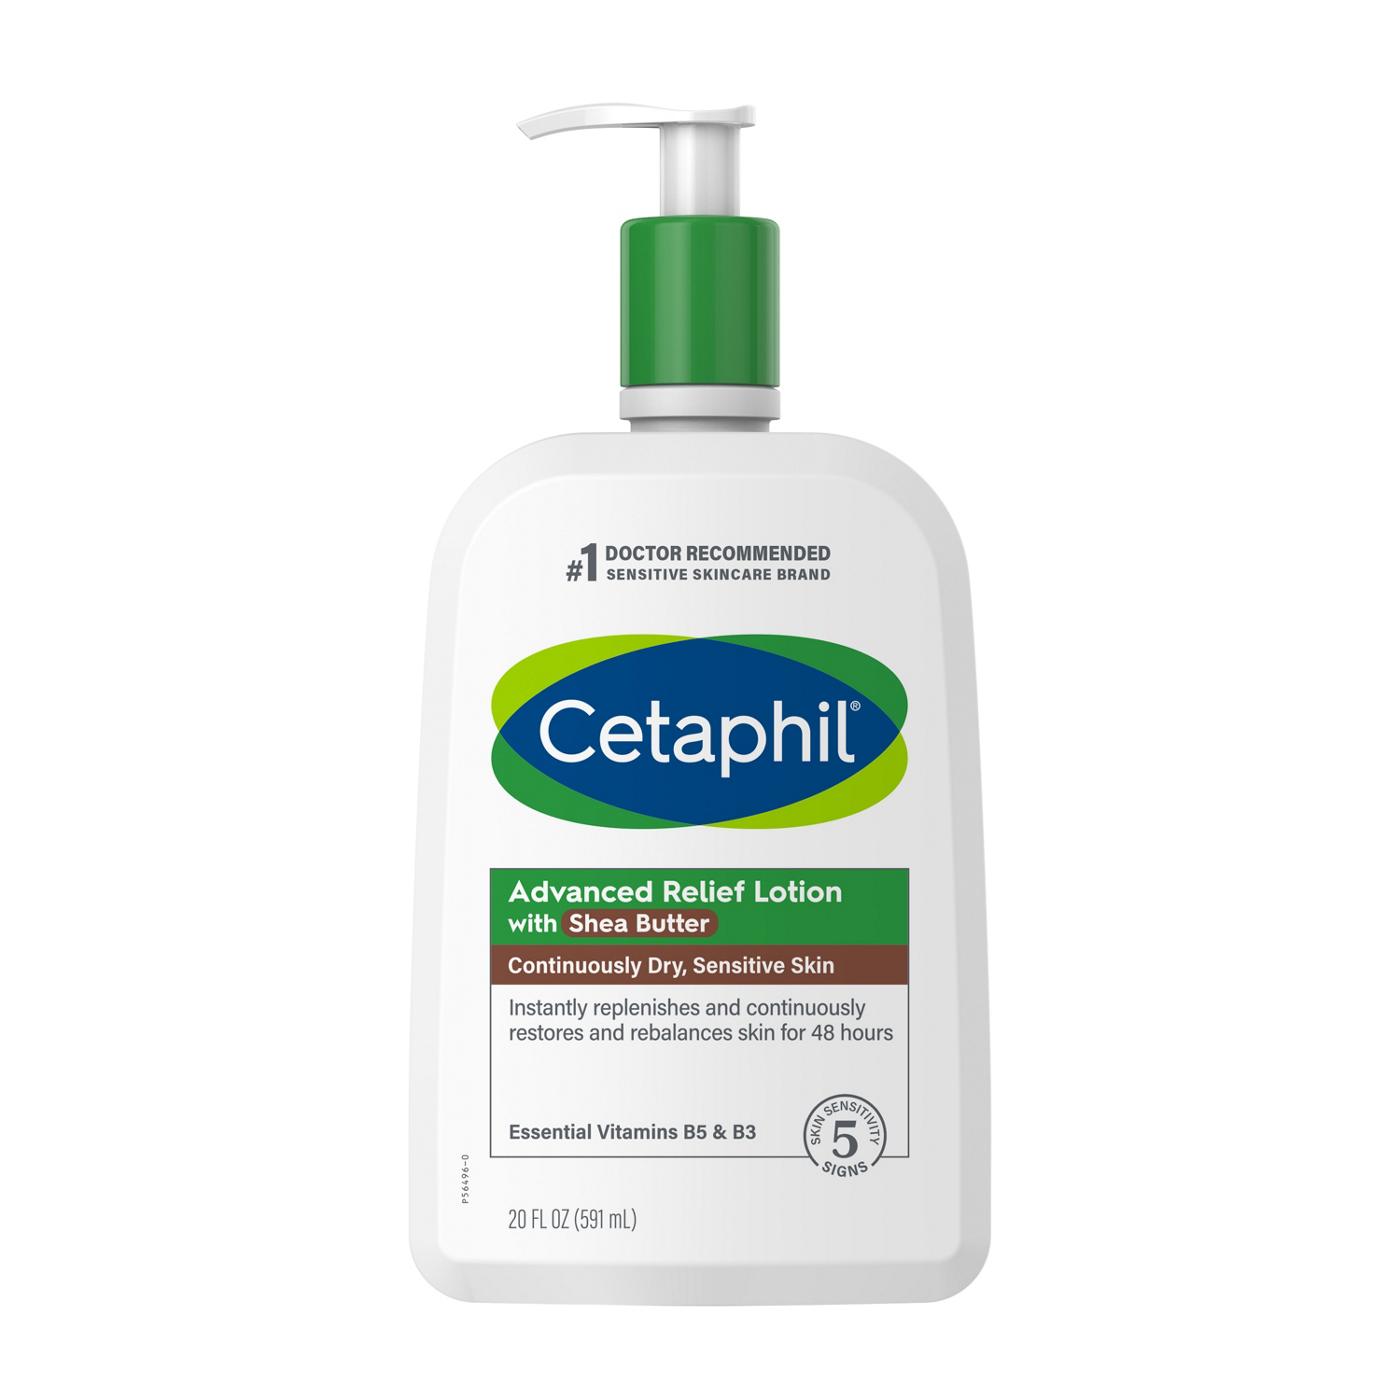 Cetaphil Advanced Relief Lotion; image 1 of 10